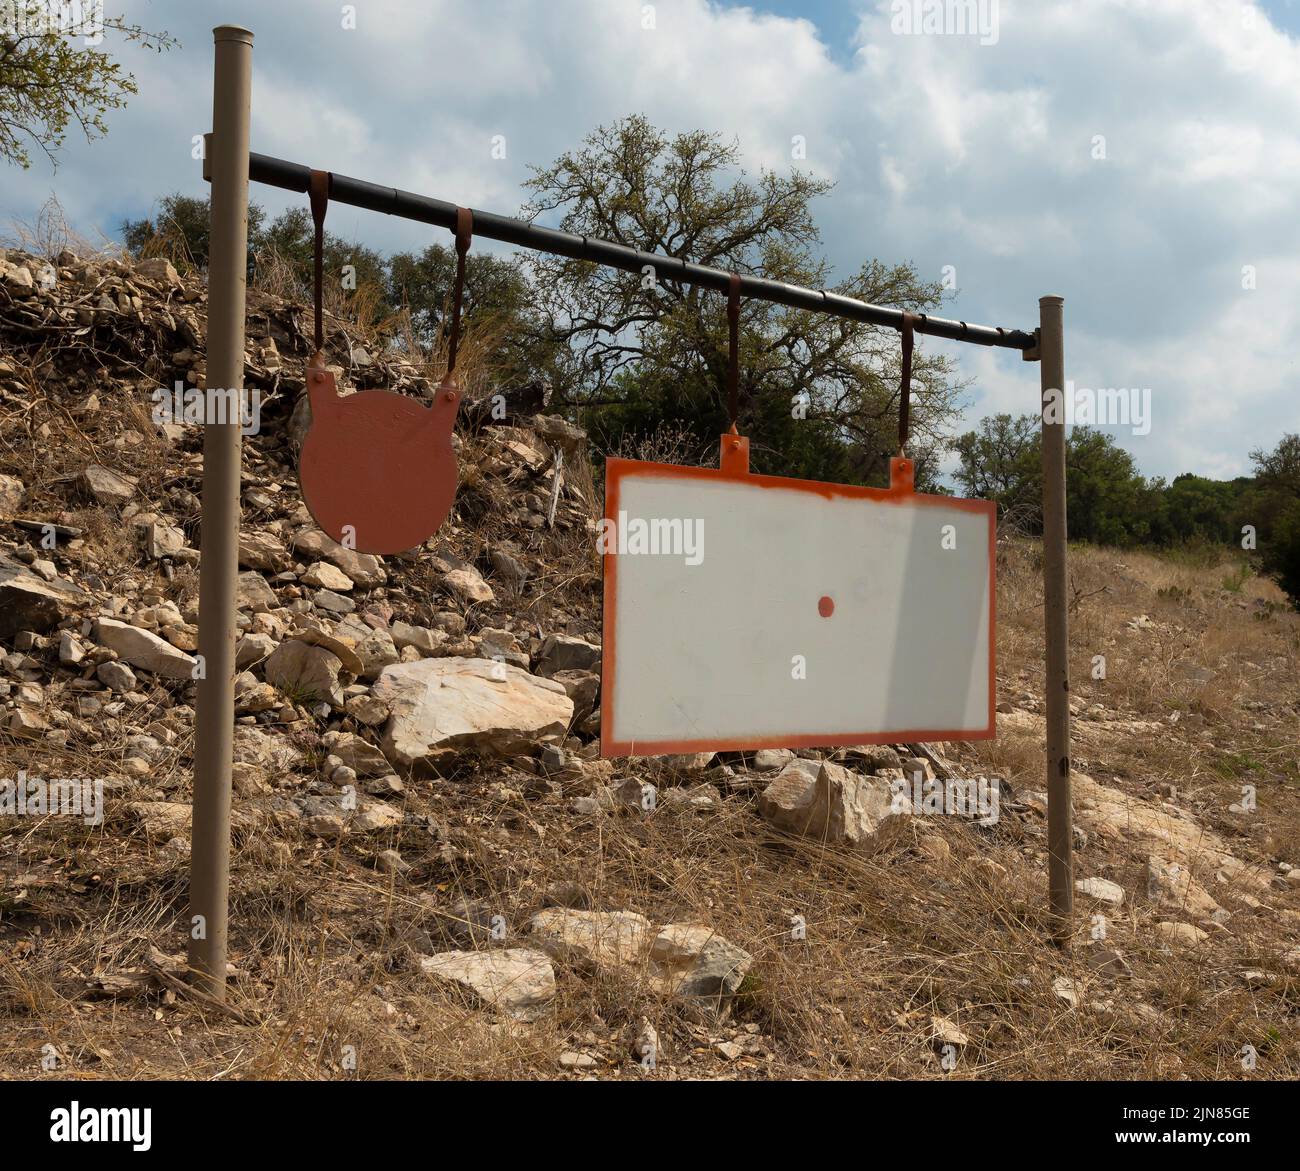 Targets made of steel for precision shooting on a hillside Stock Photo